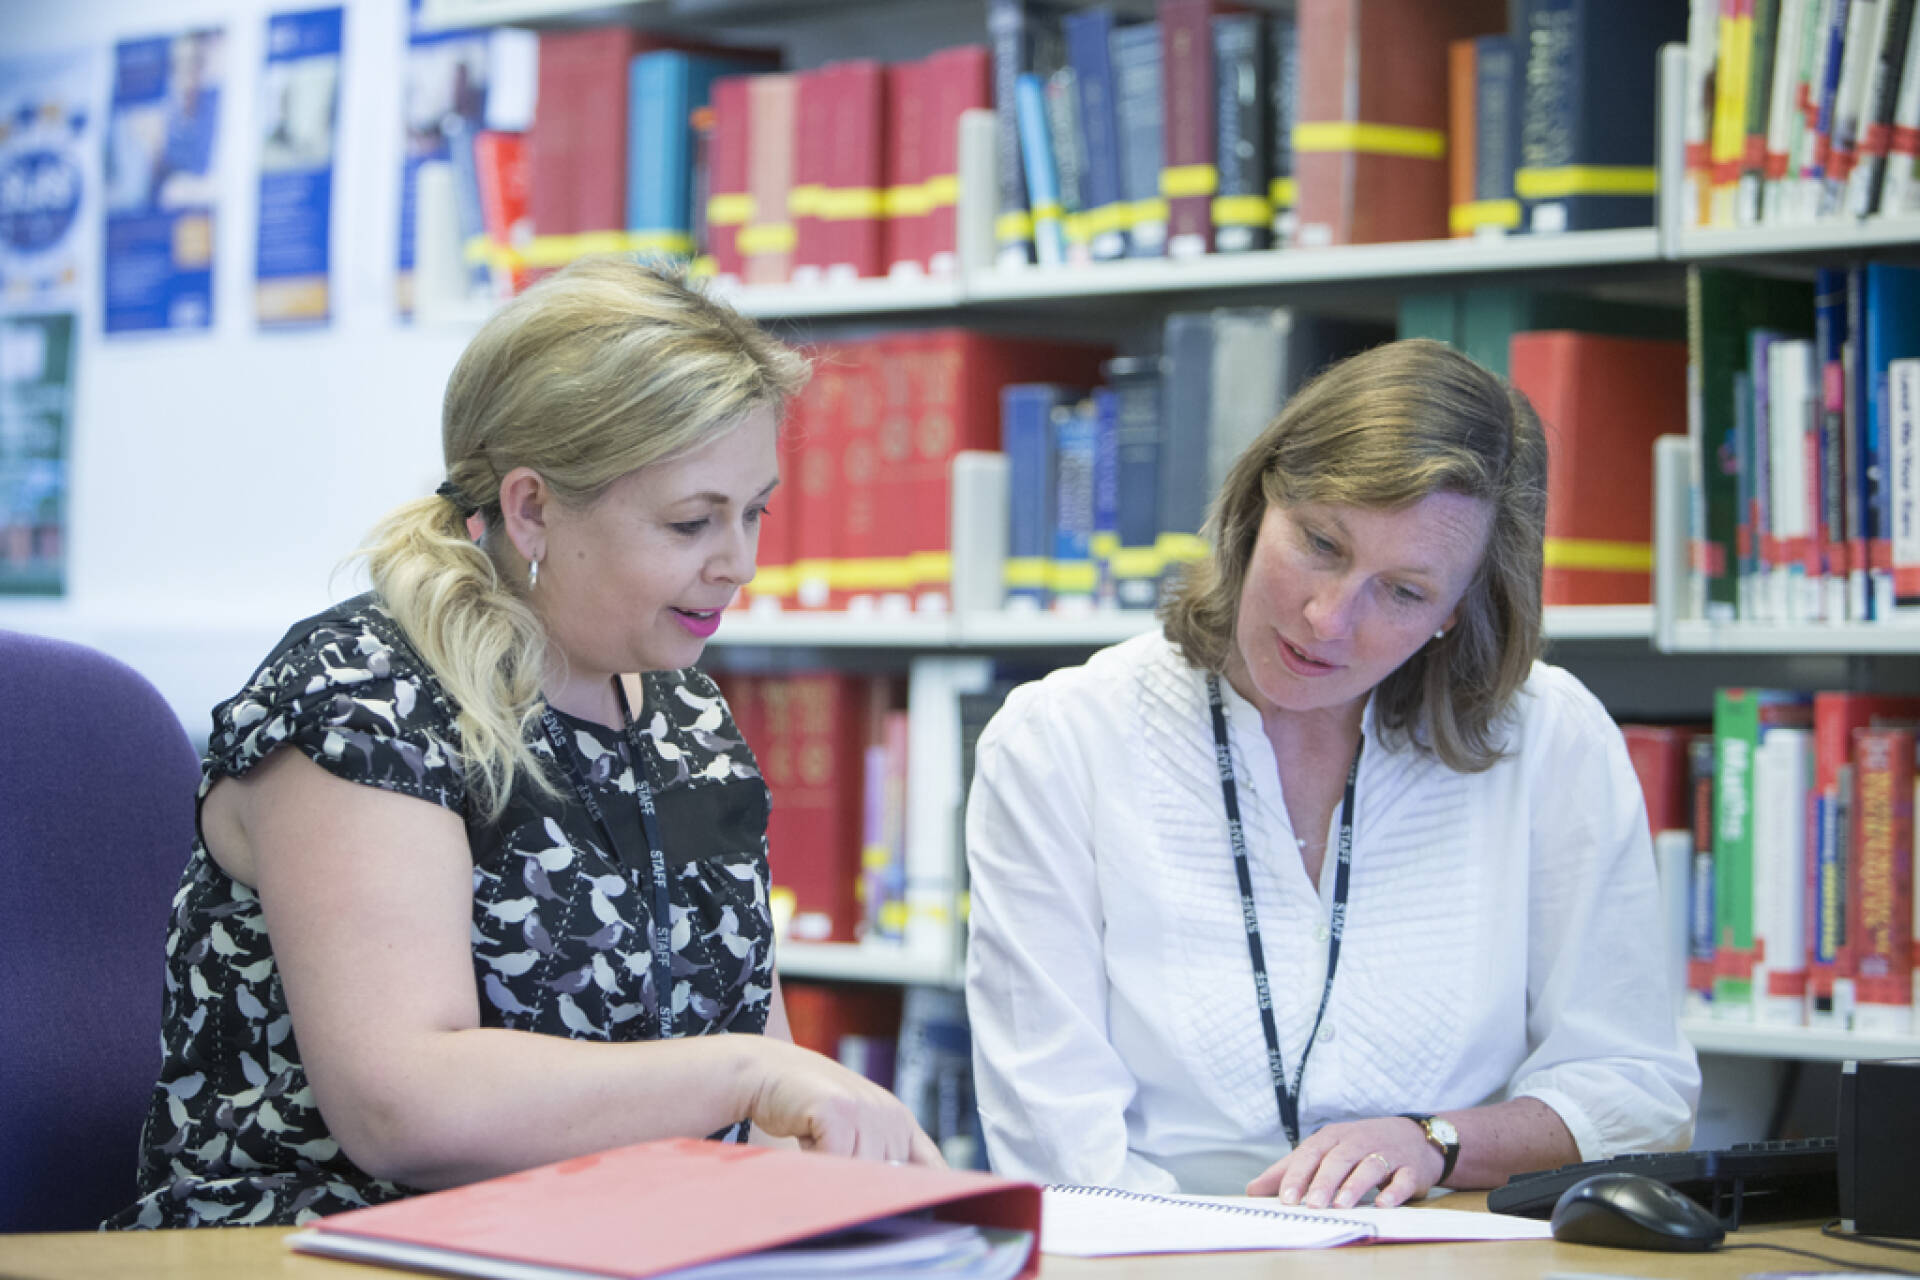 New careers guidance for staff who research